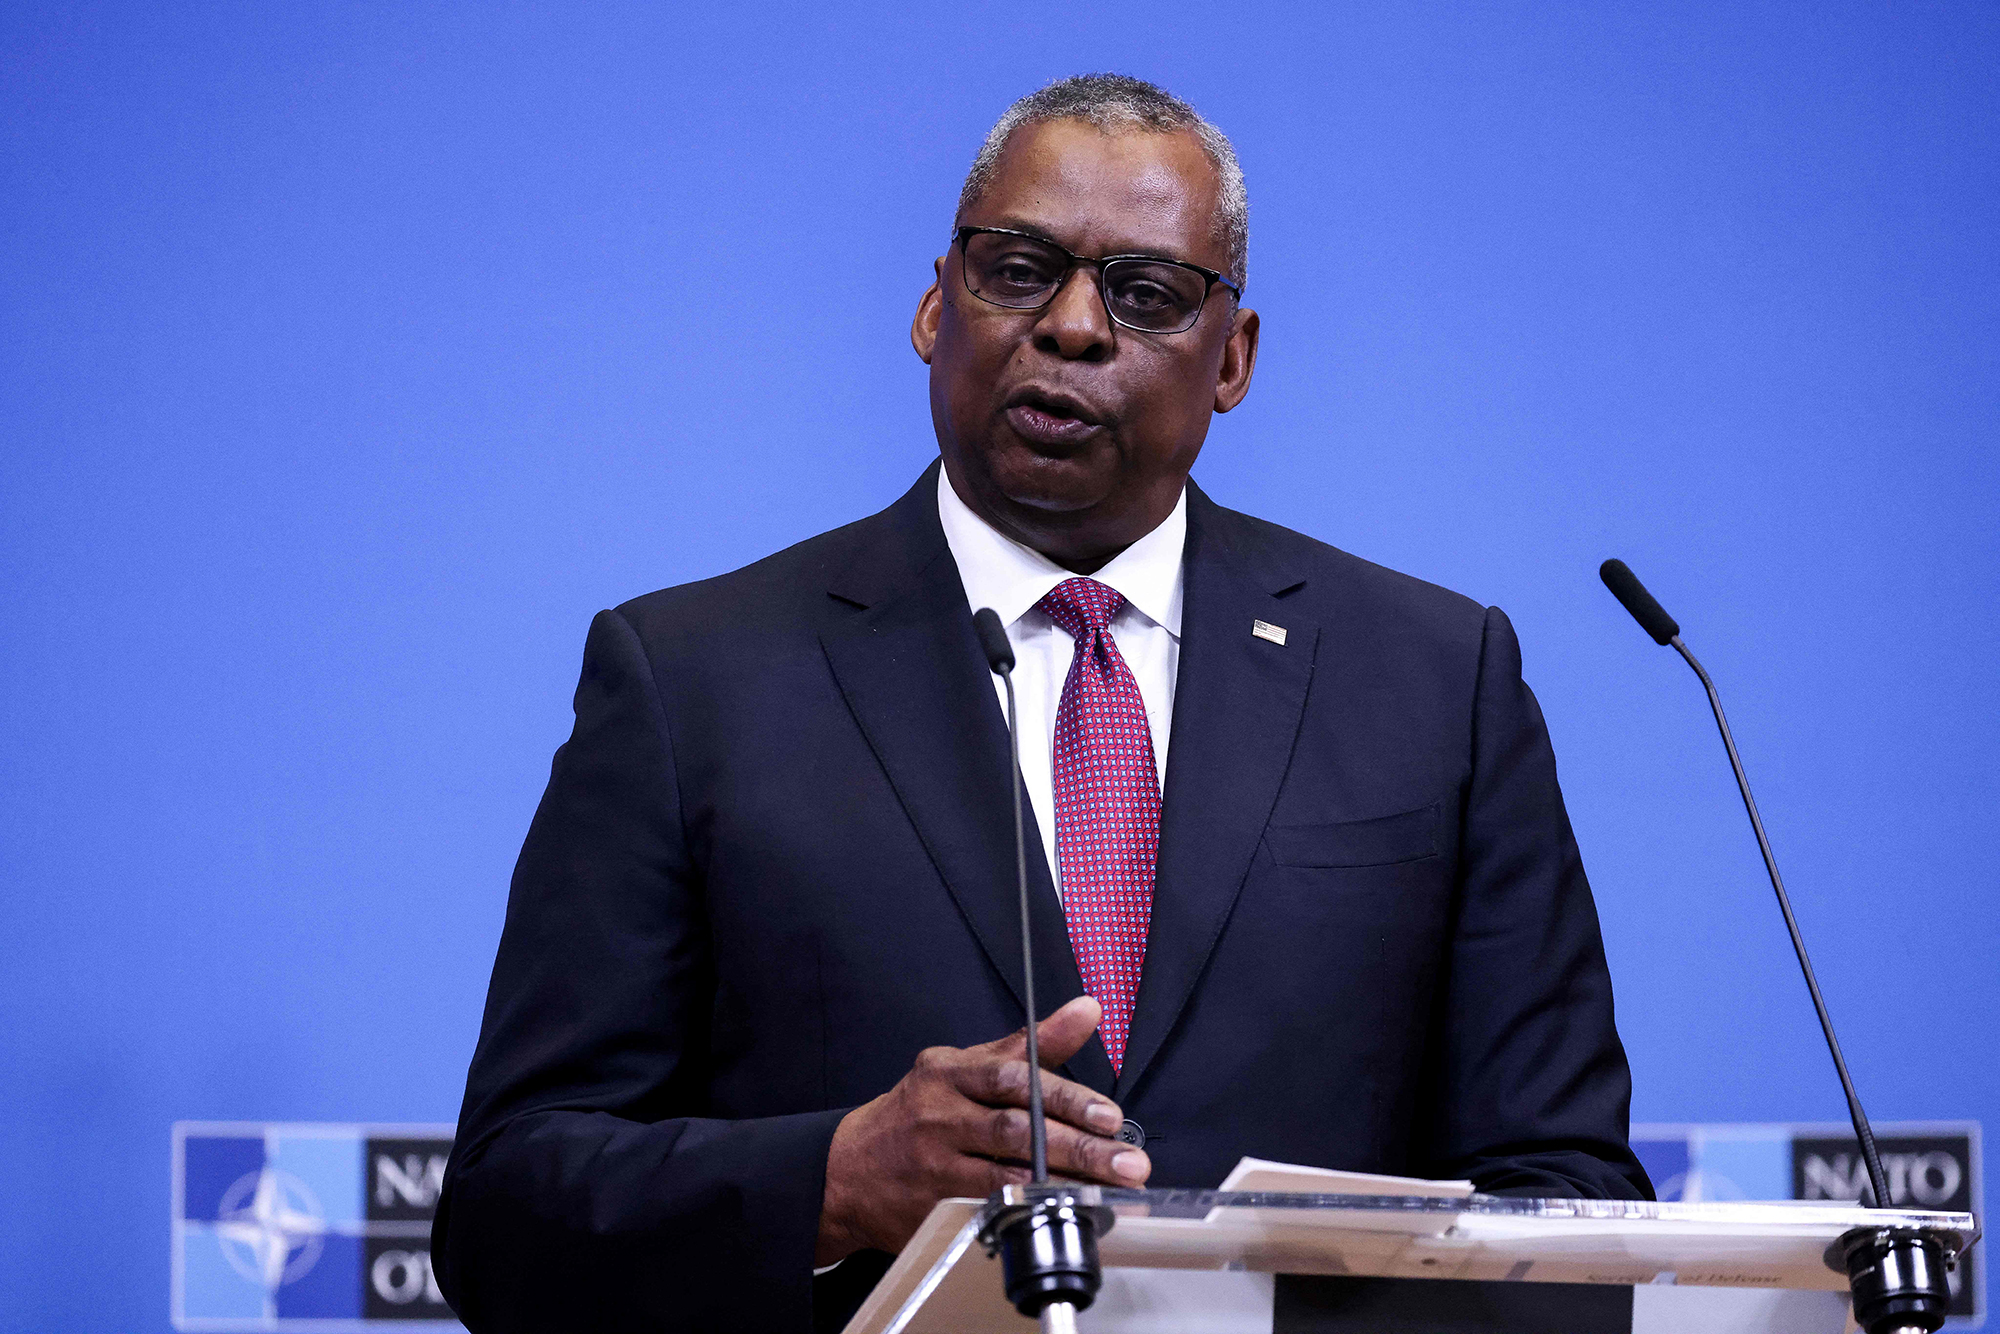 Defense Secretary Lloyd Austin holds a press conference at the end of a two-day meeting of NATO in Brussels on February 15.